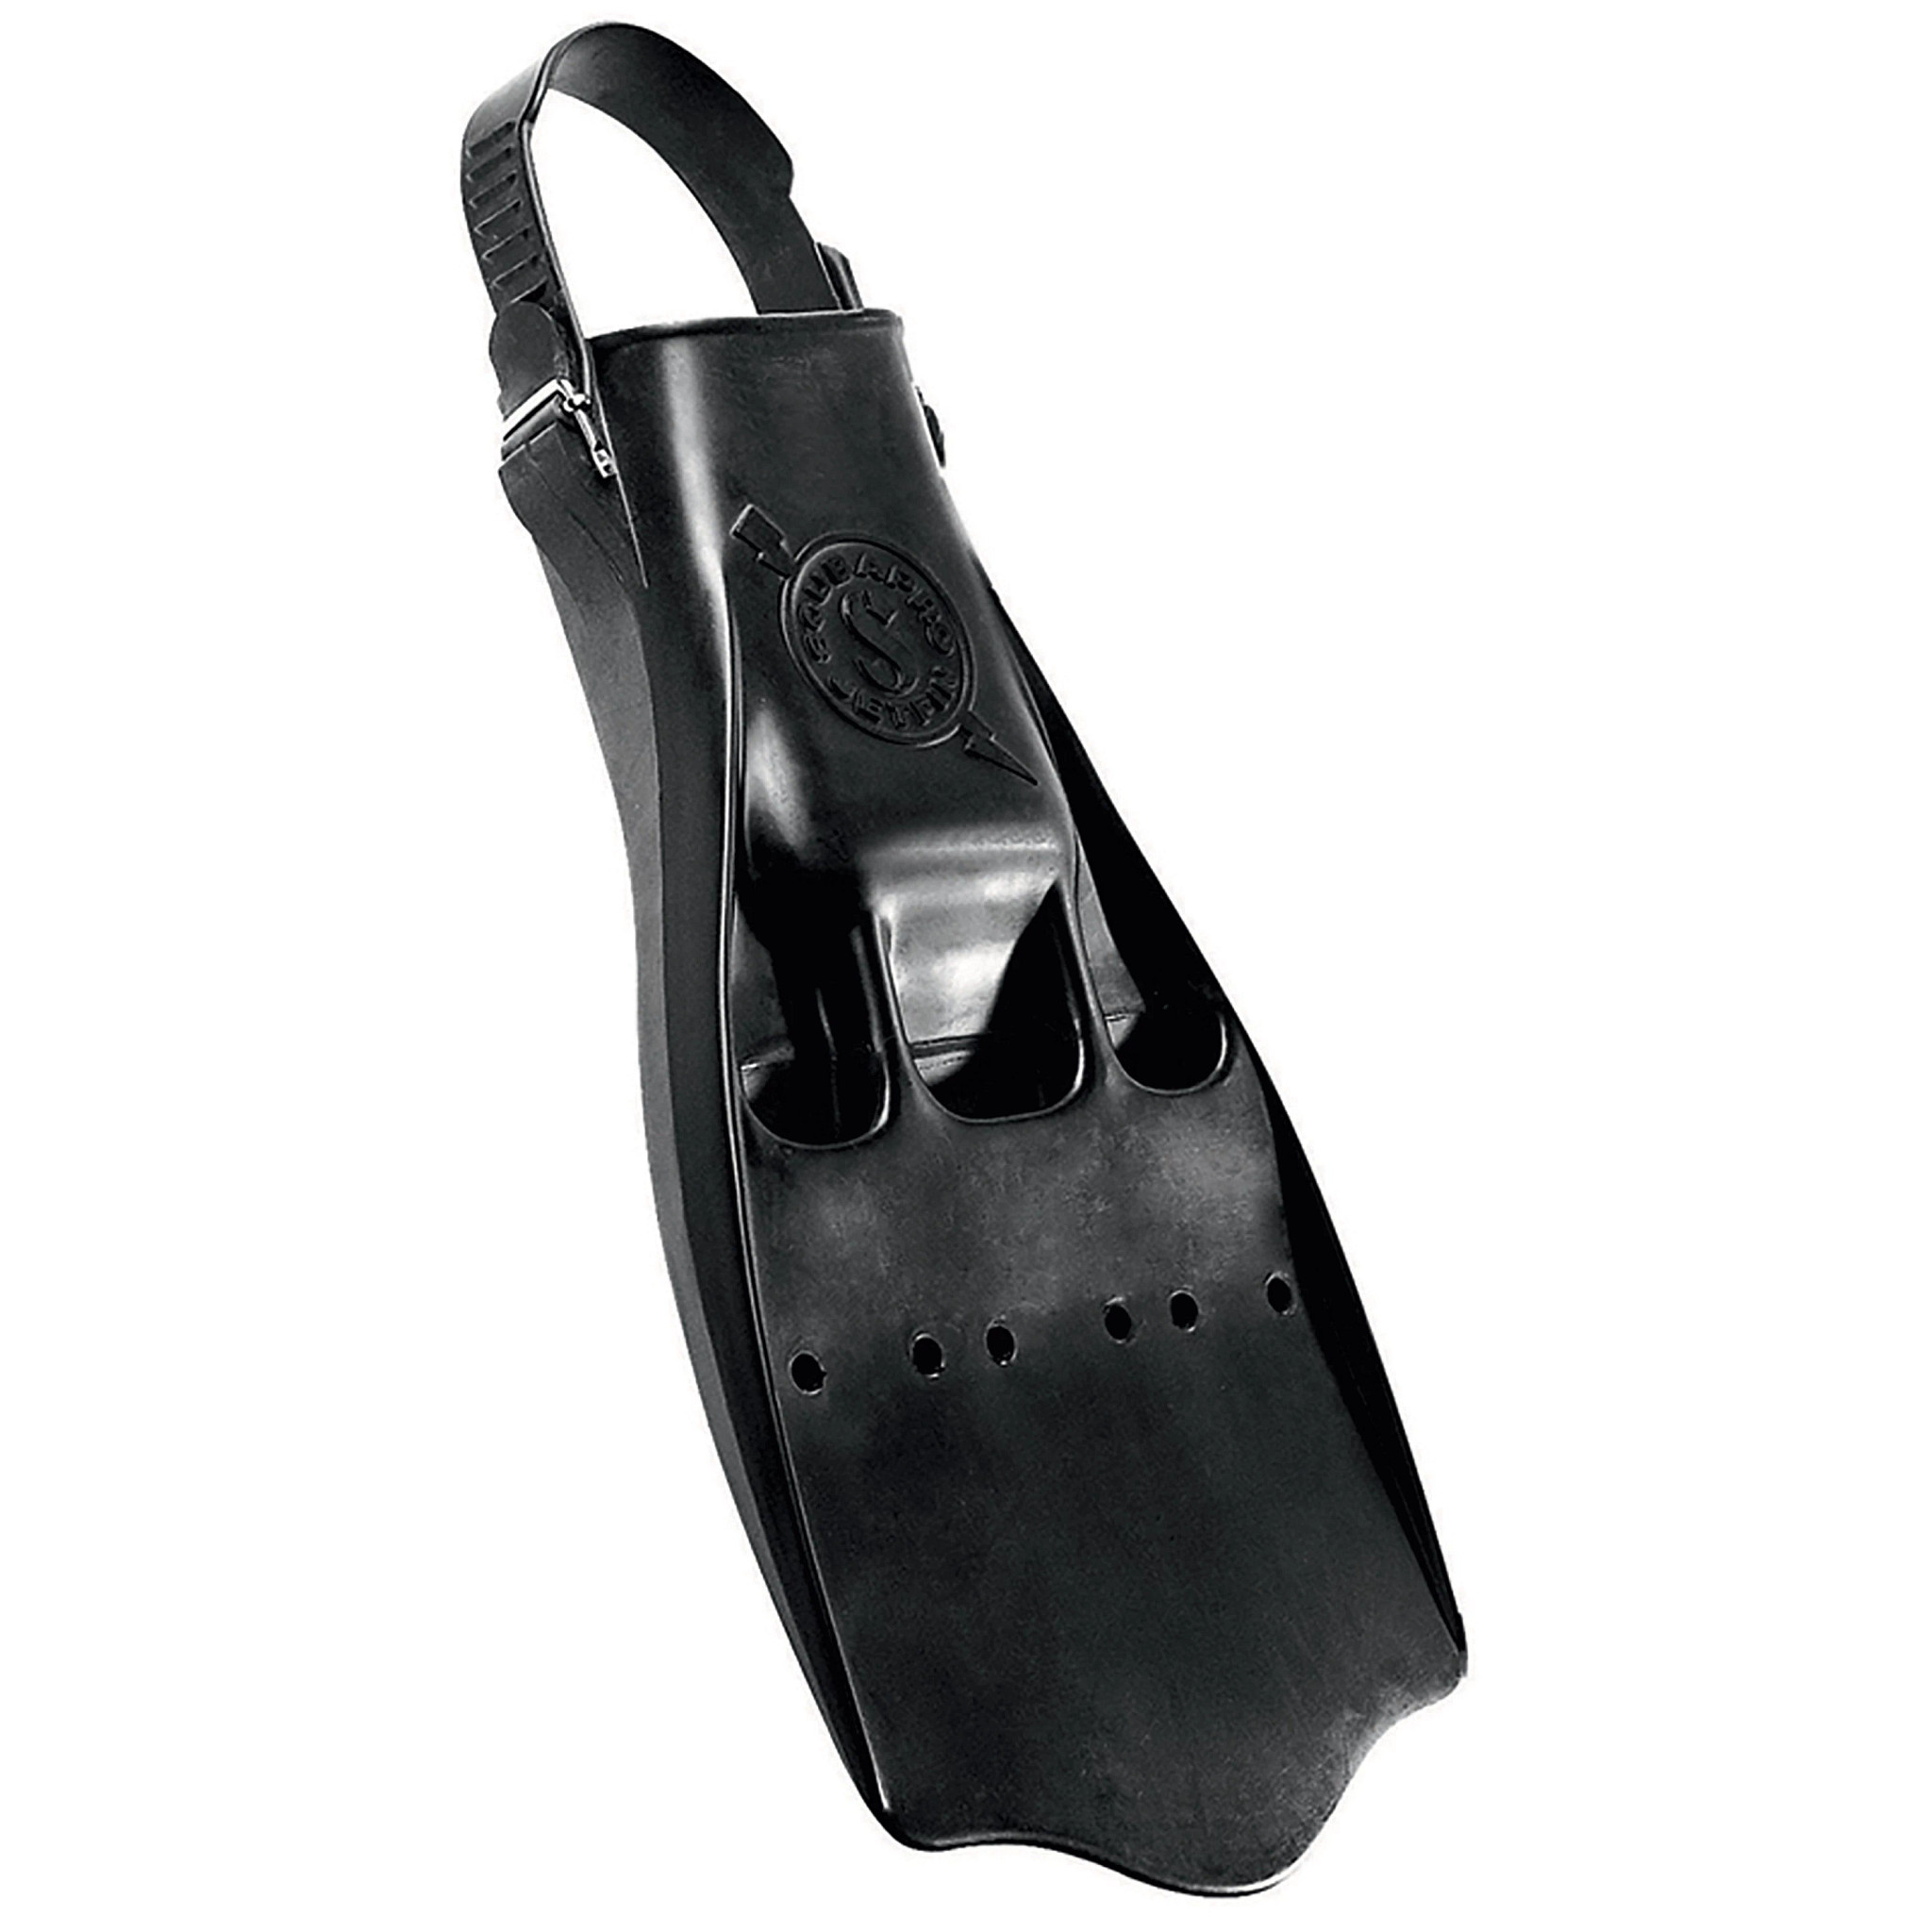 Details about   ScubaPro Scuba Pro Jet Fin Black Diving Fins Made In USA Adult Size Large 